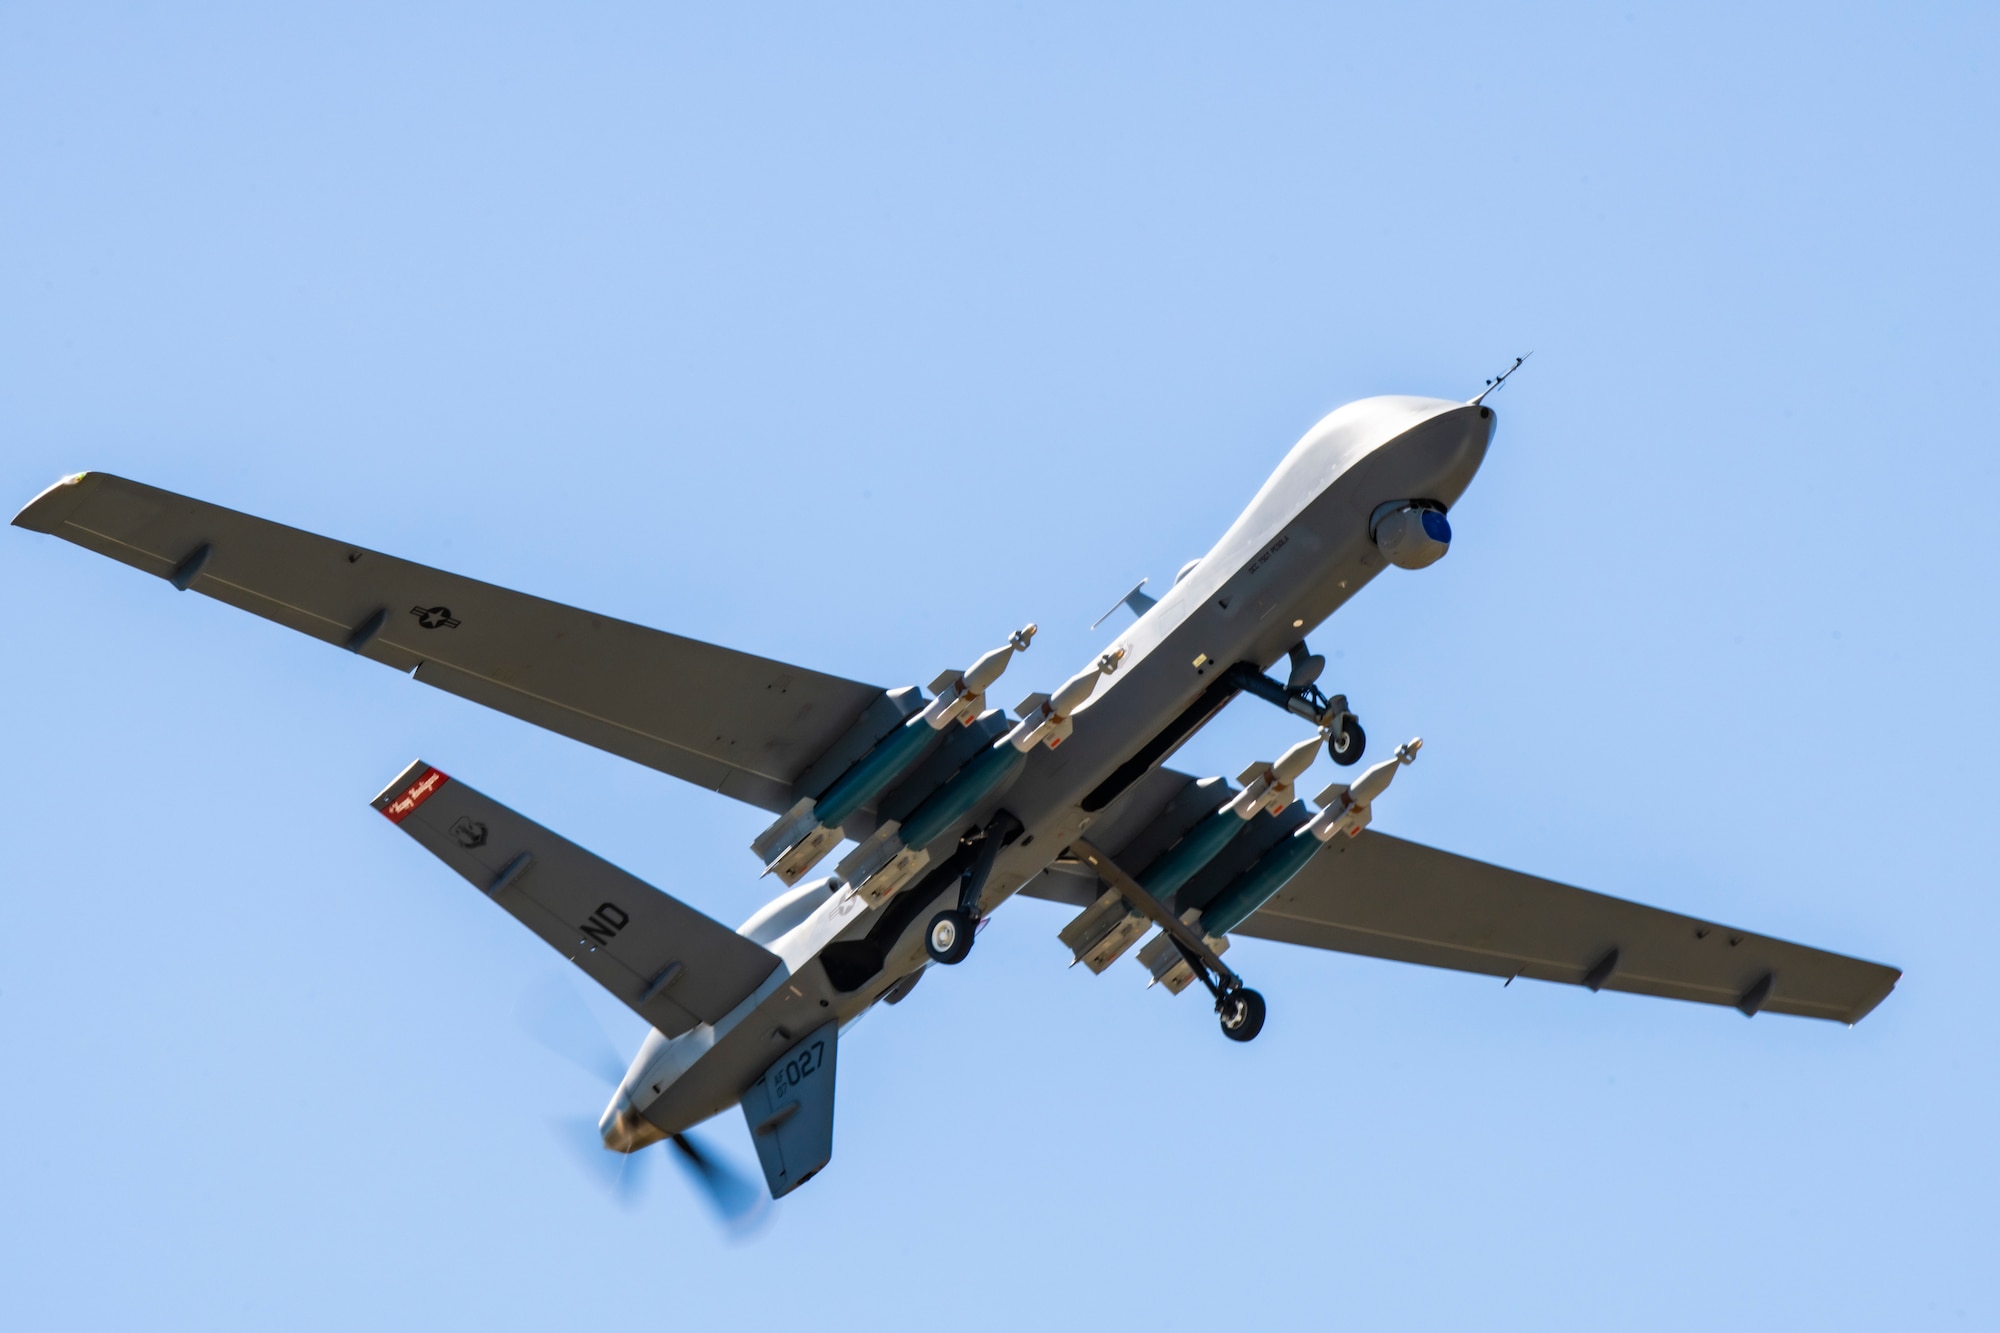 An MQ-9 Reaper assigned to the 119th Wing of the North Dakota Air National Guard, takes flight during Exercise Southern Strike 2021 at the Gulfport Combat Readiness Training Center, Gulfport, Miss., April 19, 2021. Southern Strike is a large-scale, joint and international combat training exercise featuring counter-insurgency, close-air support, non-combatant evacuations, and maritime special operations. (U.S. Air National Guard photo by Tech. Sgt. Jon Alderman)